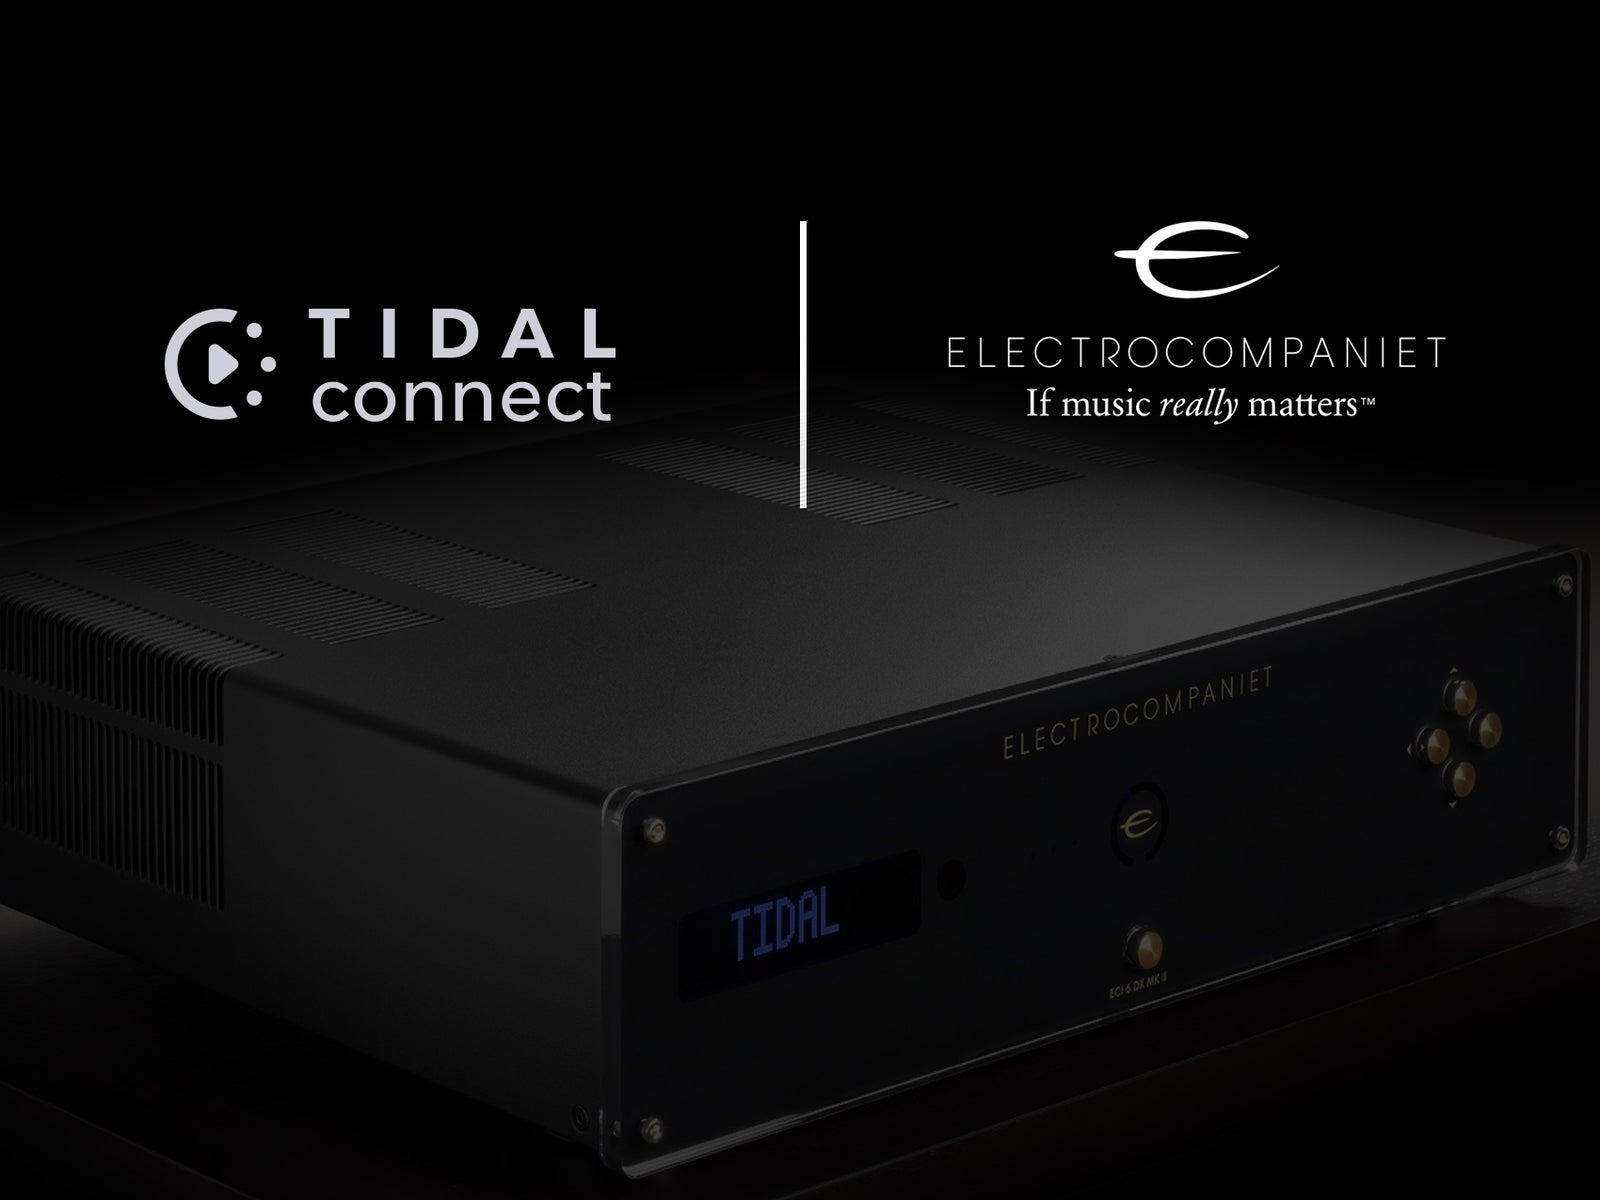 Introducing the TIDAL Connect integration